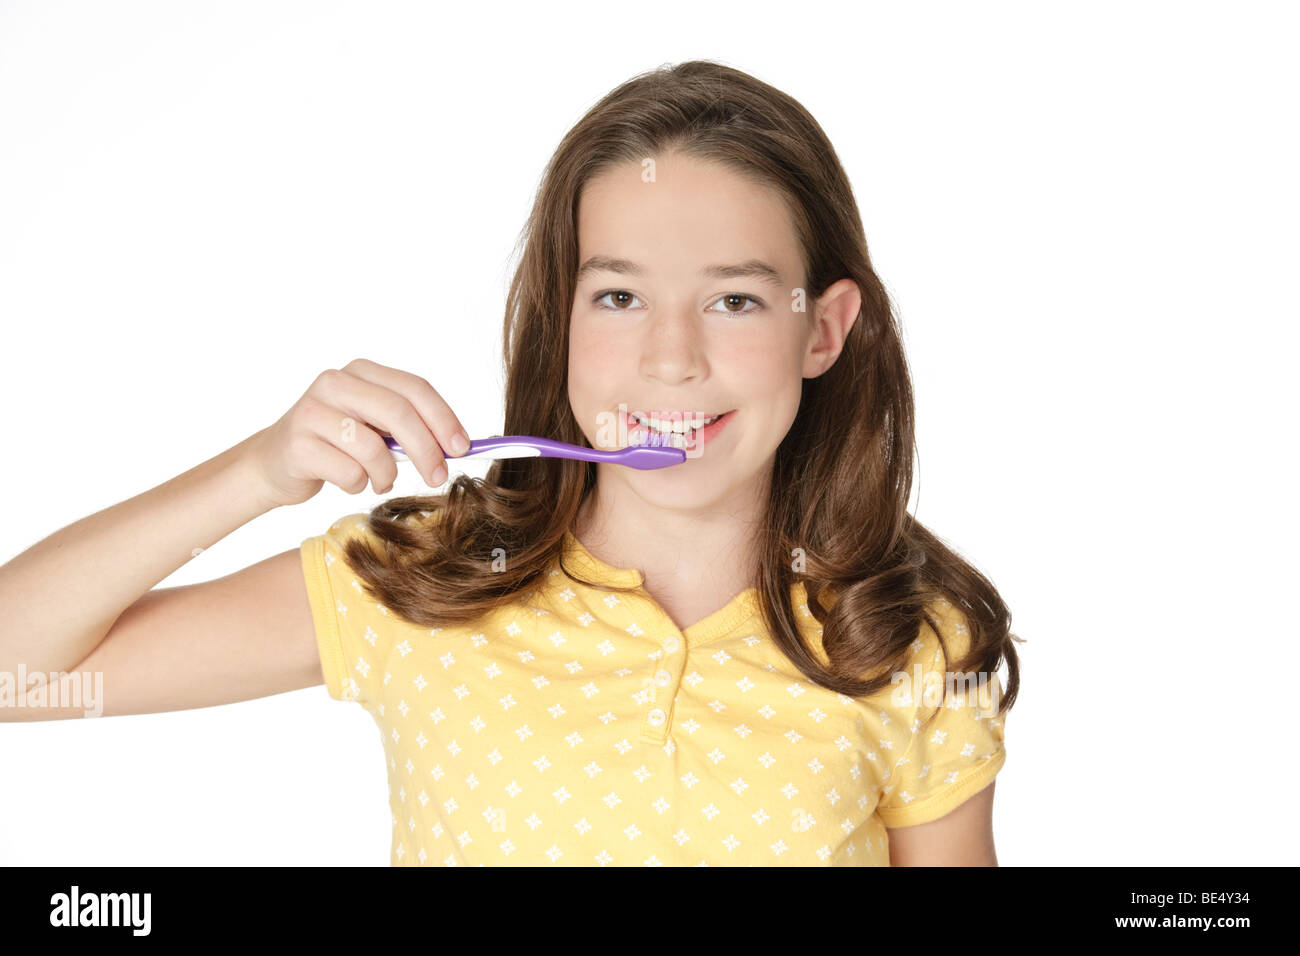 Cute Caucasian girl brushing her teeth isolated on a white background Stock Photo